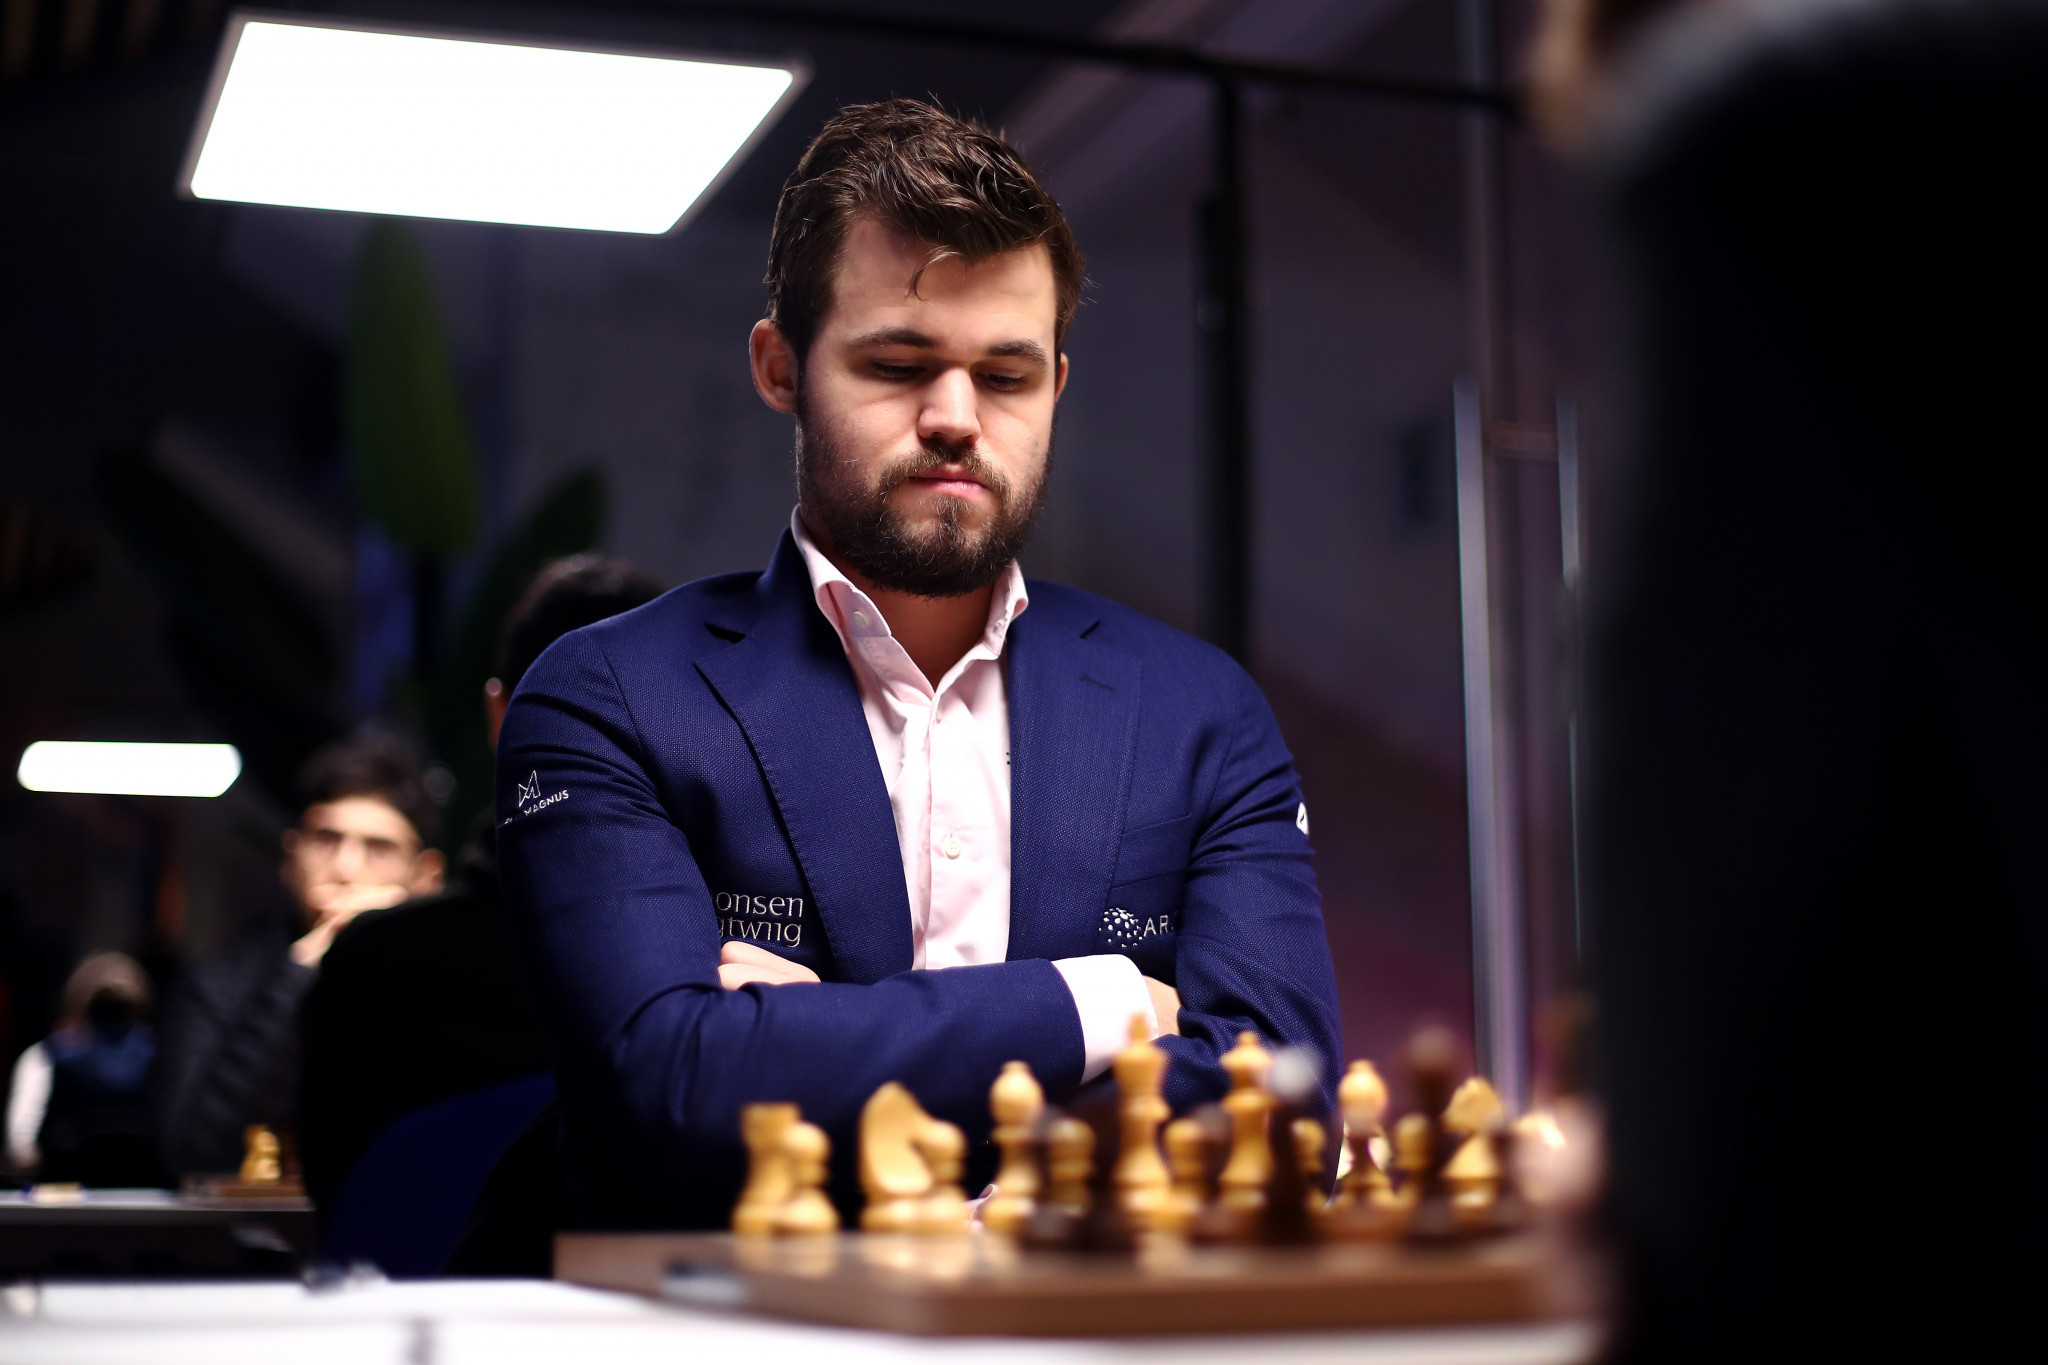 World chess champion Carlsen is highest earning esports player of 2020